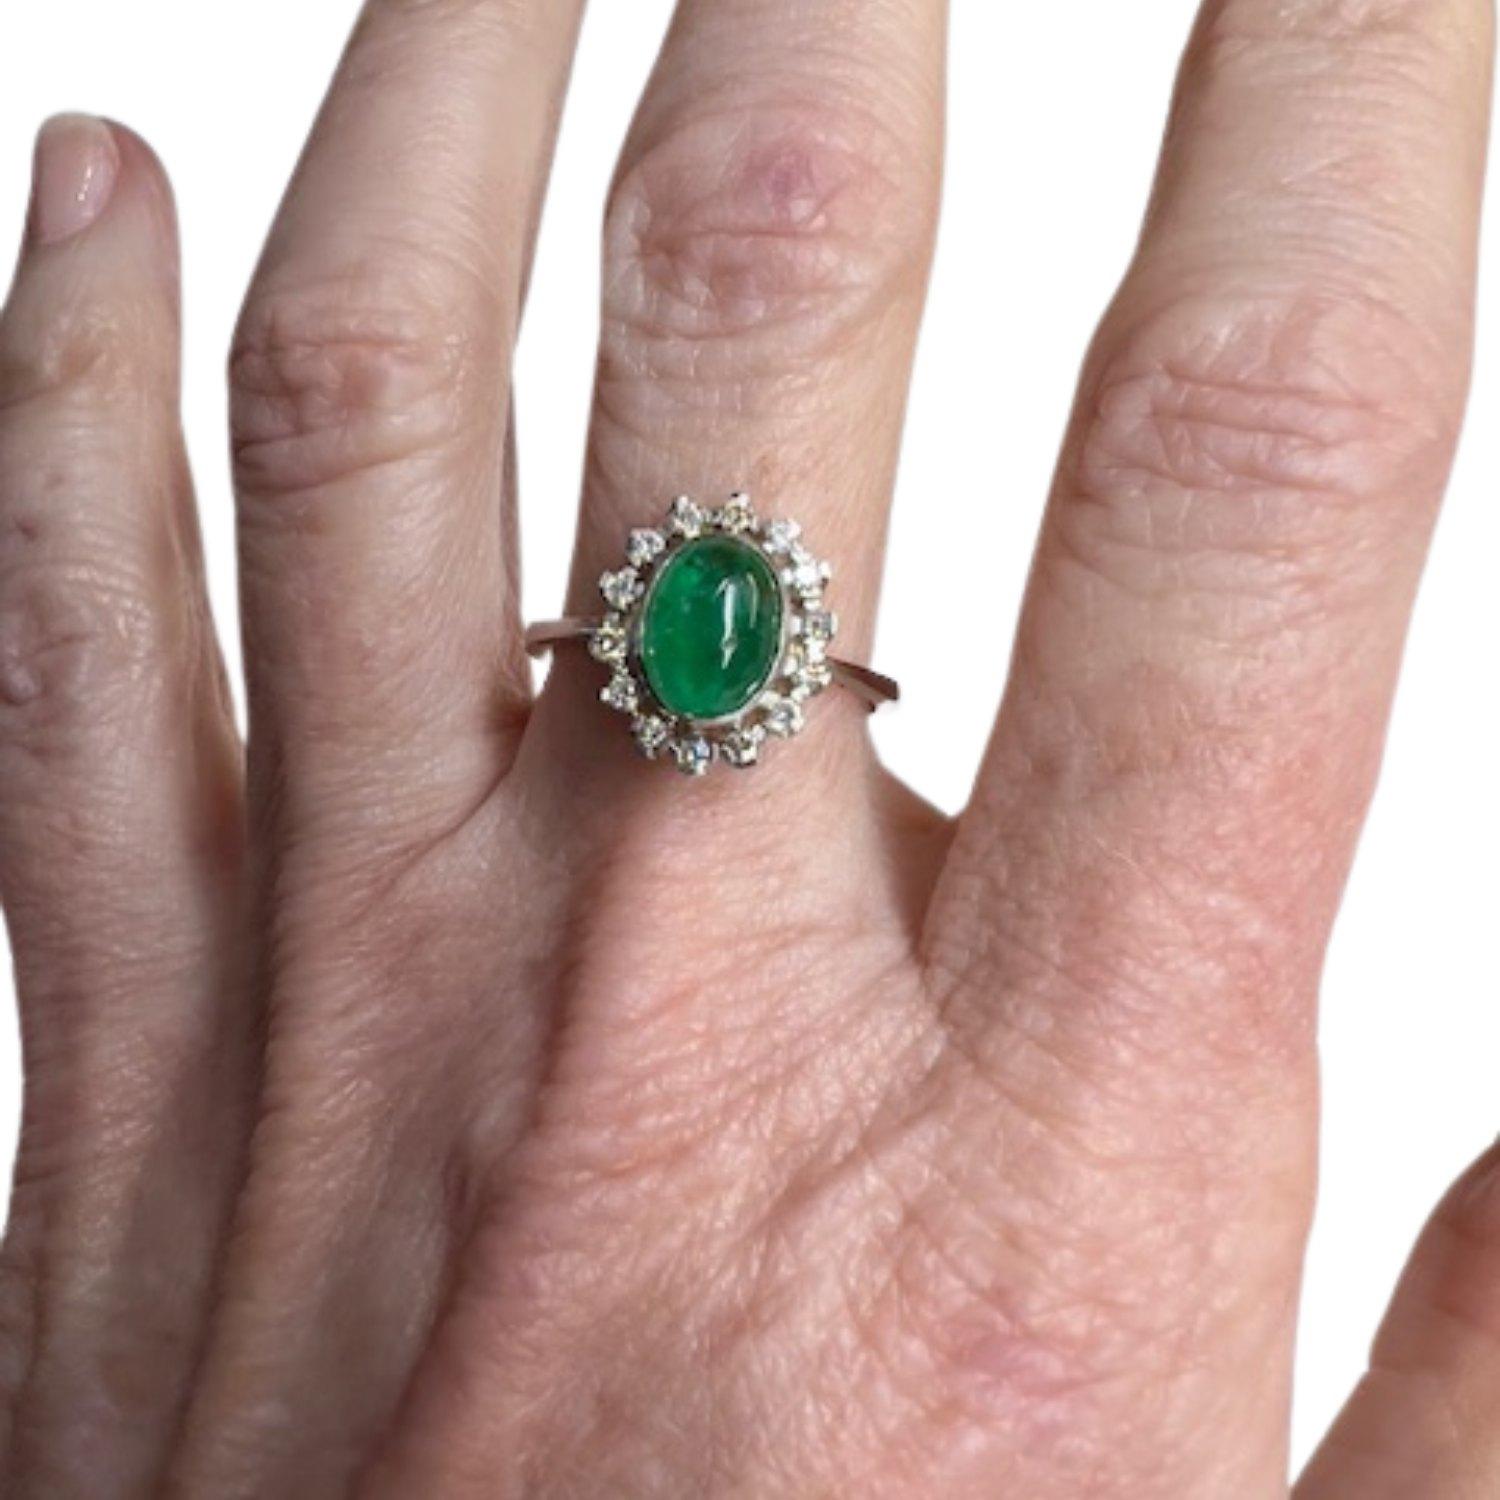 Cabochon Art Deco Style with Diamonds and Emerald Rosette Platinum Ring